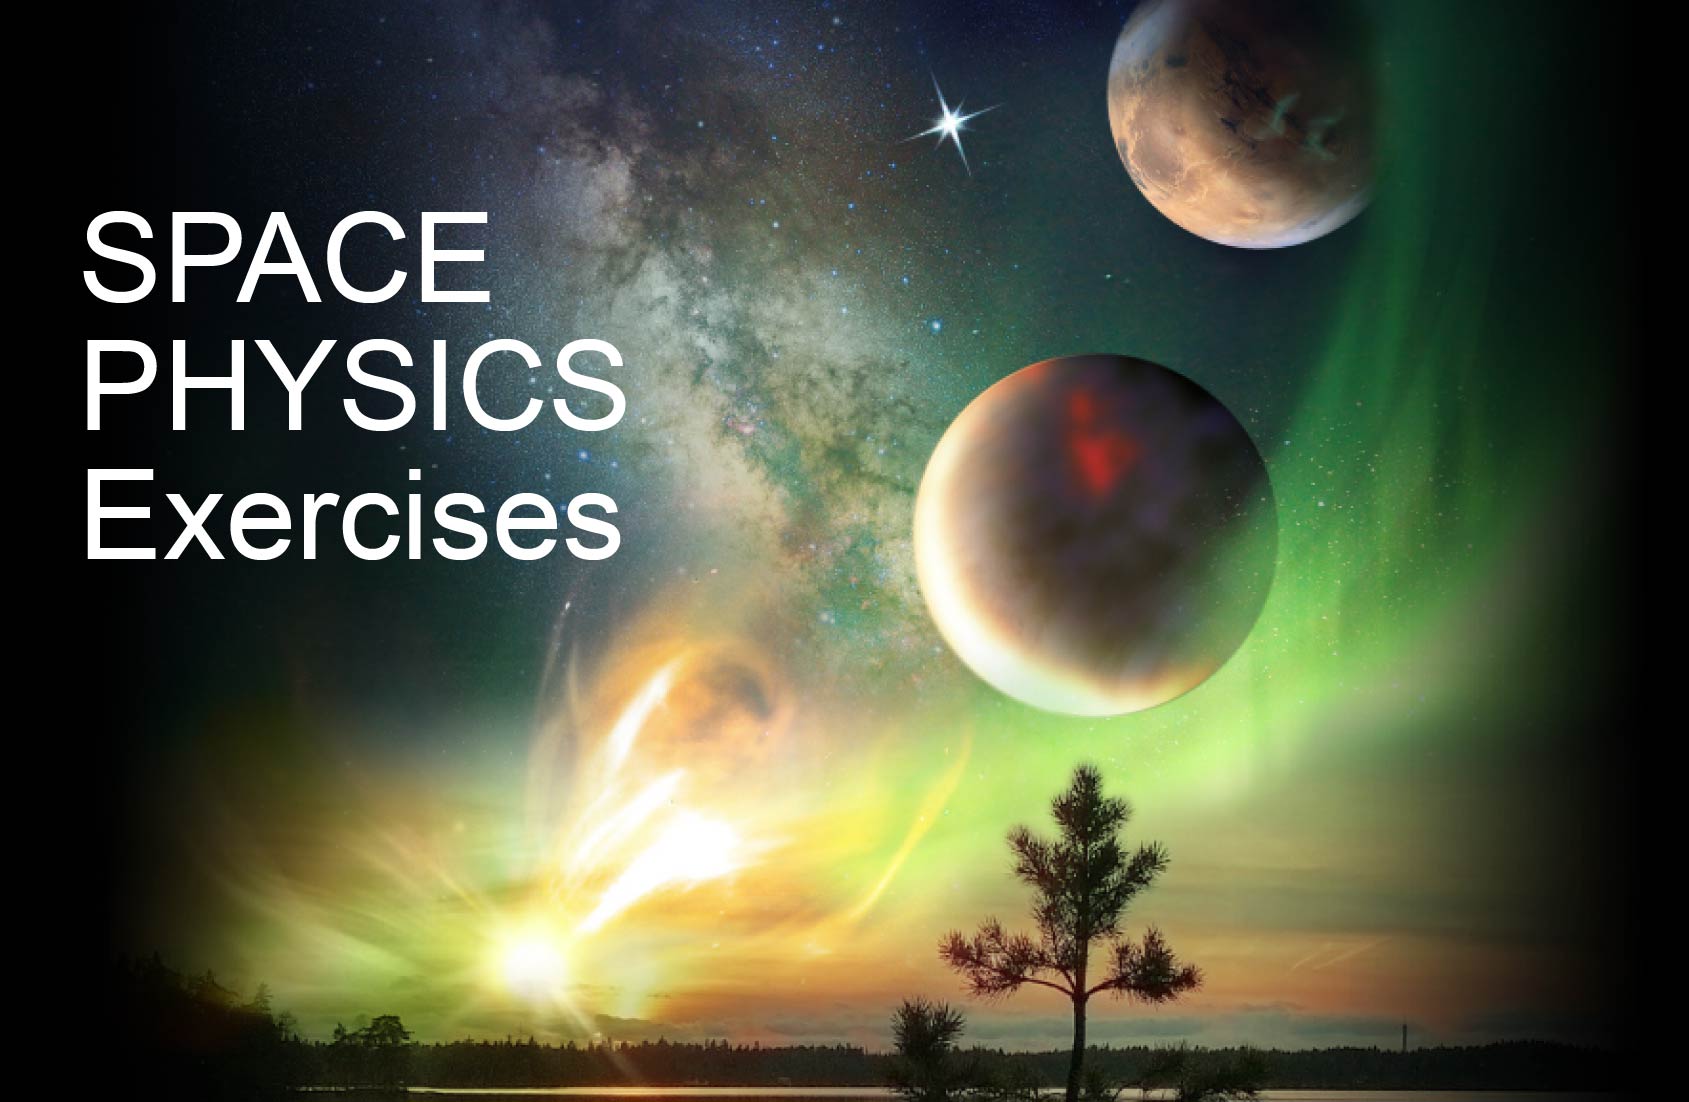 Space Physics Exercises homepage image